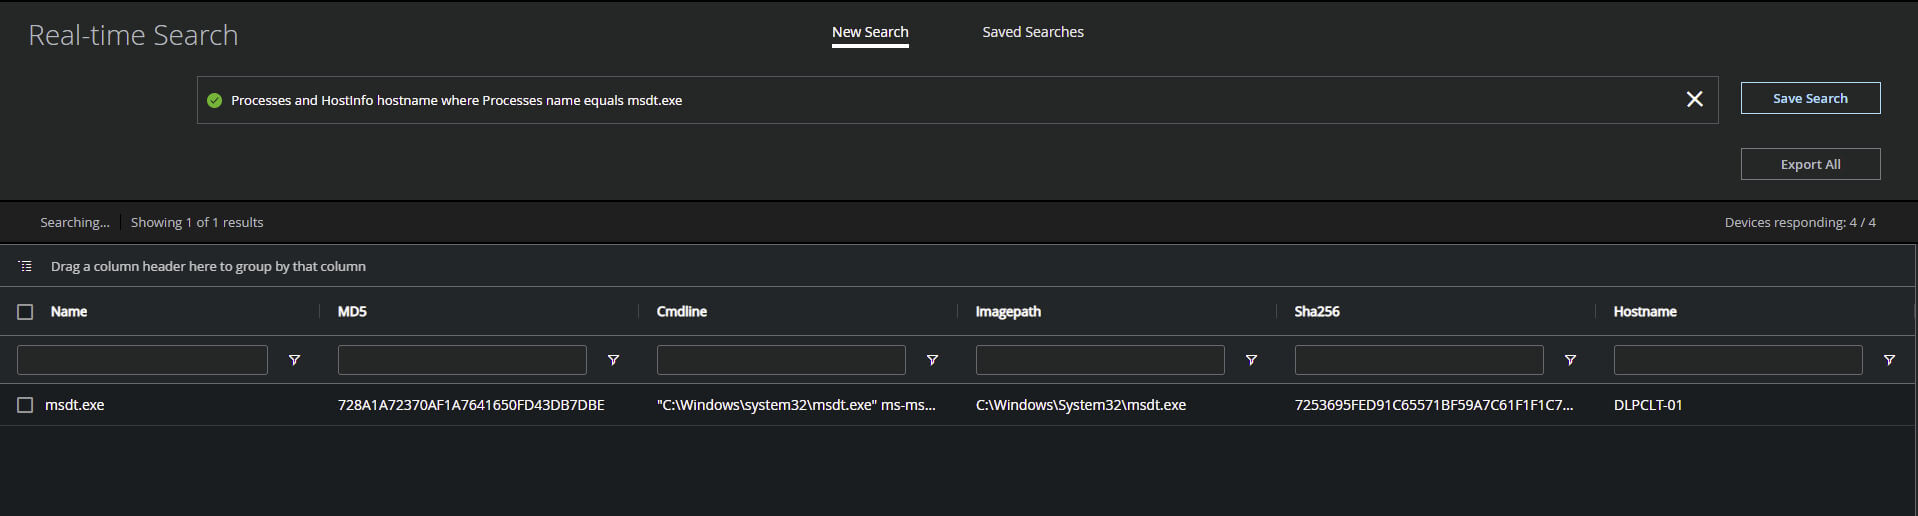 MVISION EDR Real-time search to locate ongoing MSDT.exe activity